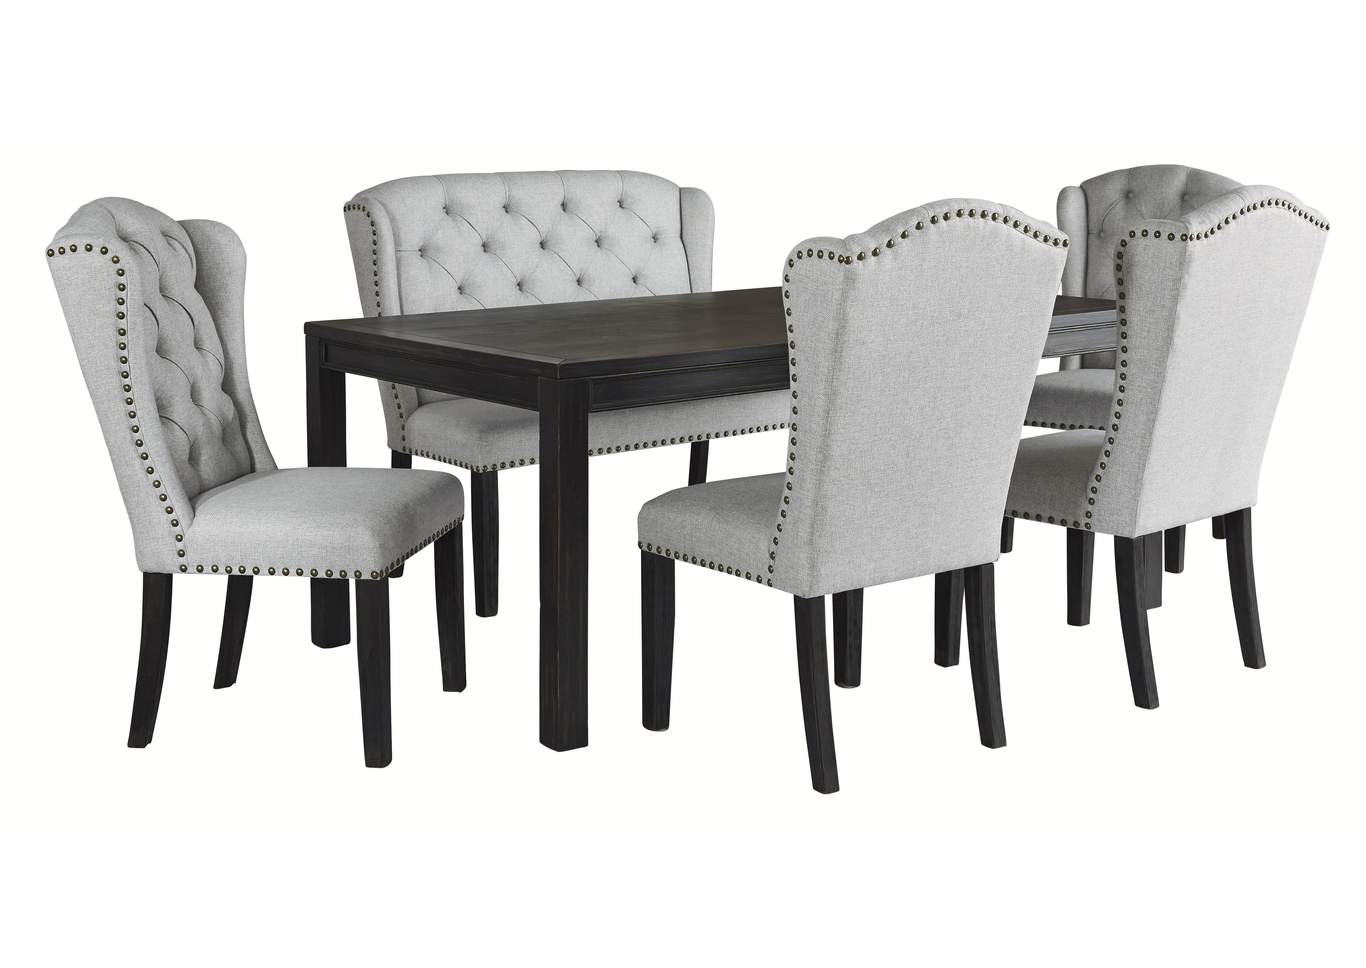 Jeanette 6 Piece Dining Room Set Ashley, High Quality Dining Room Set